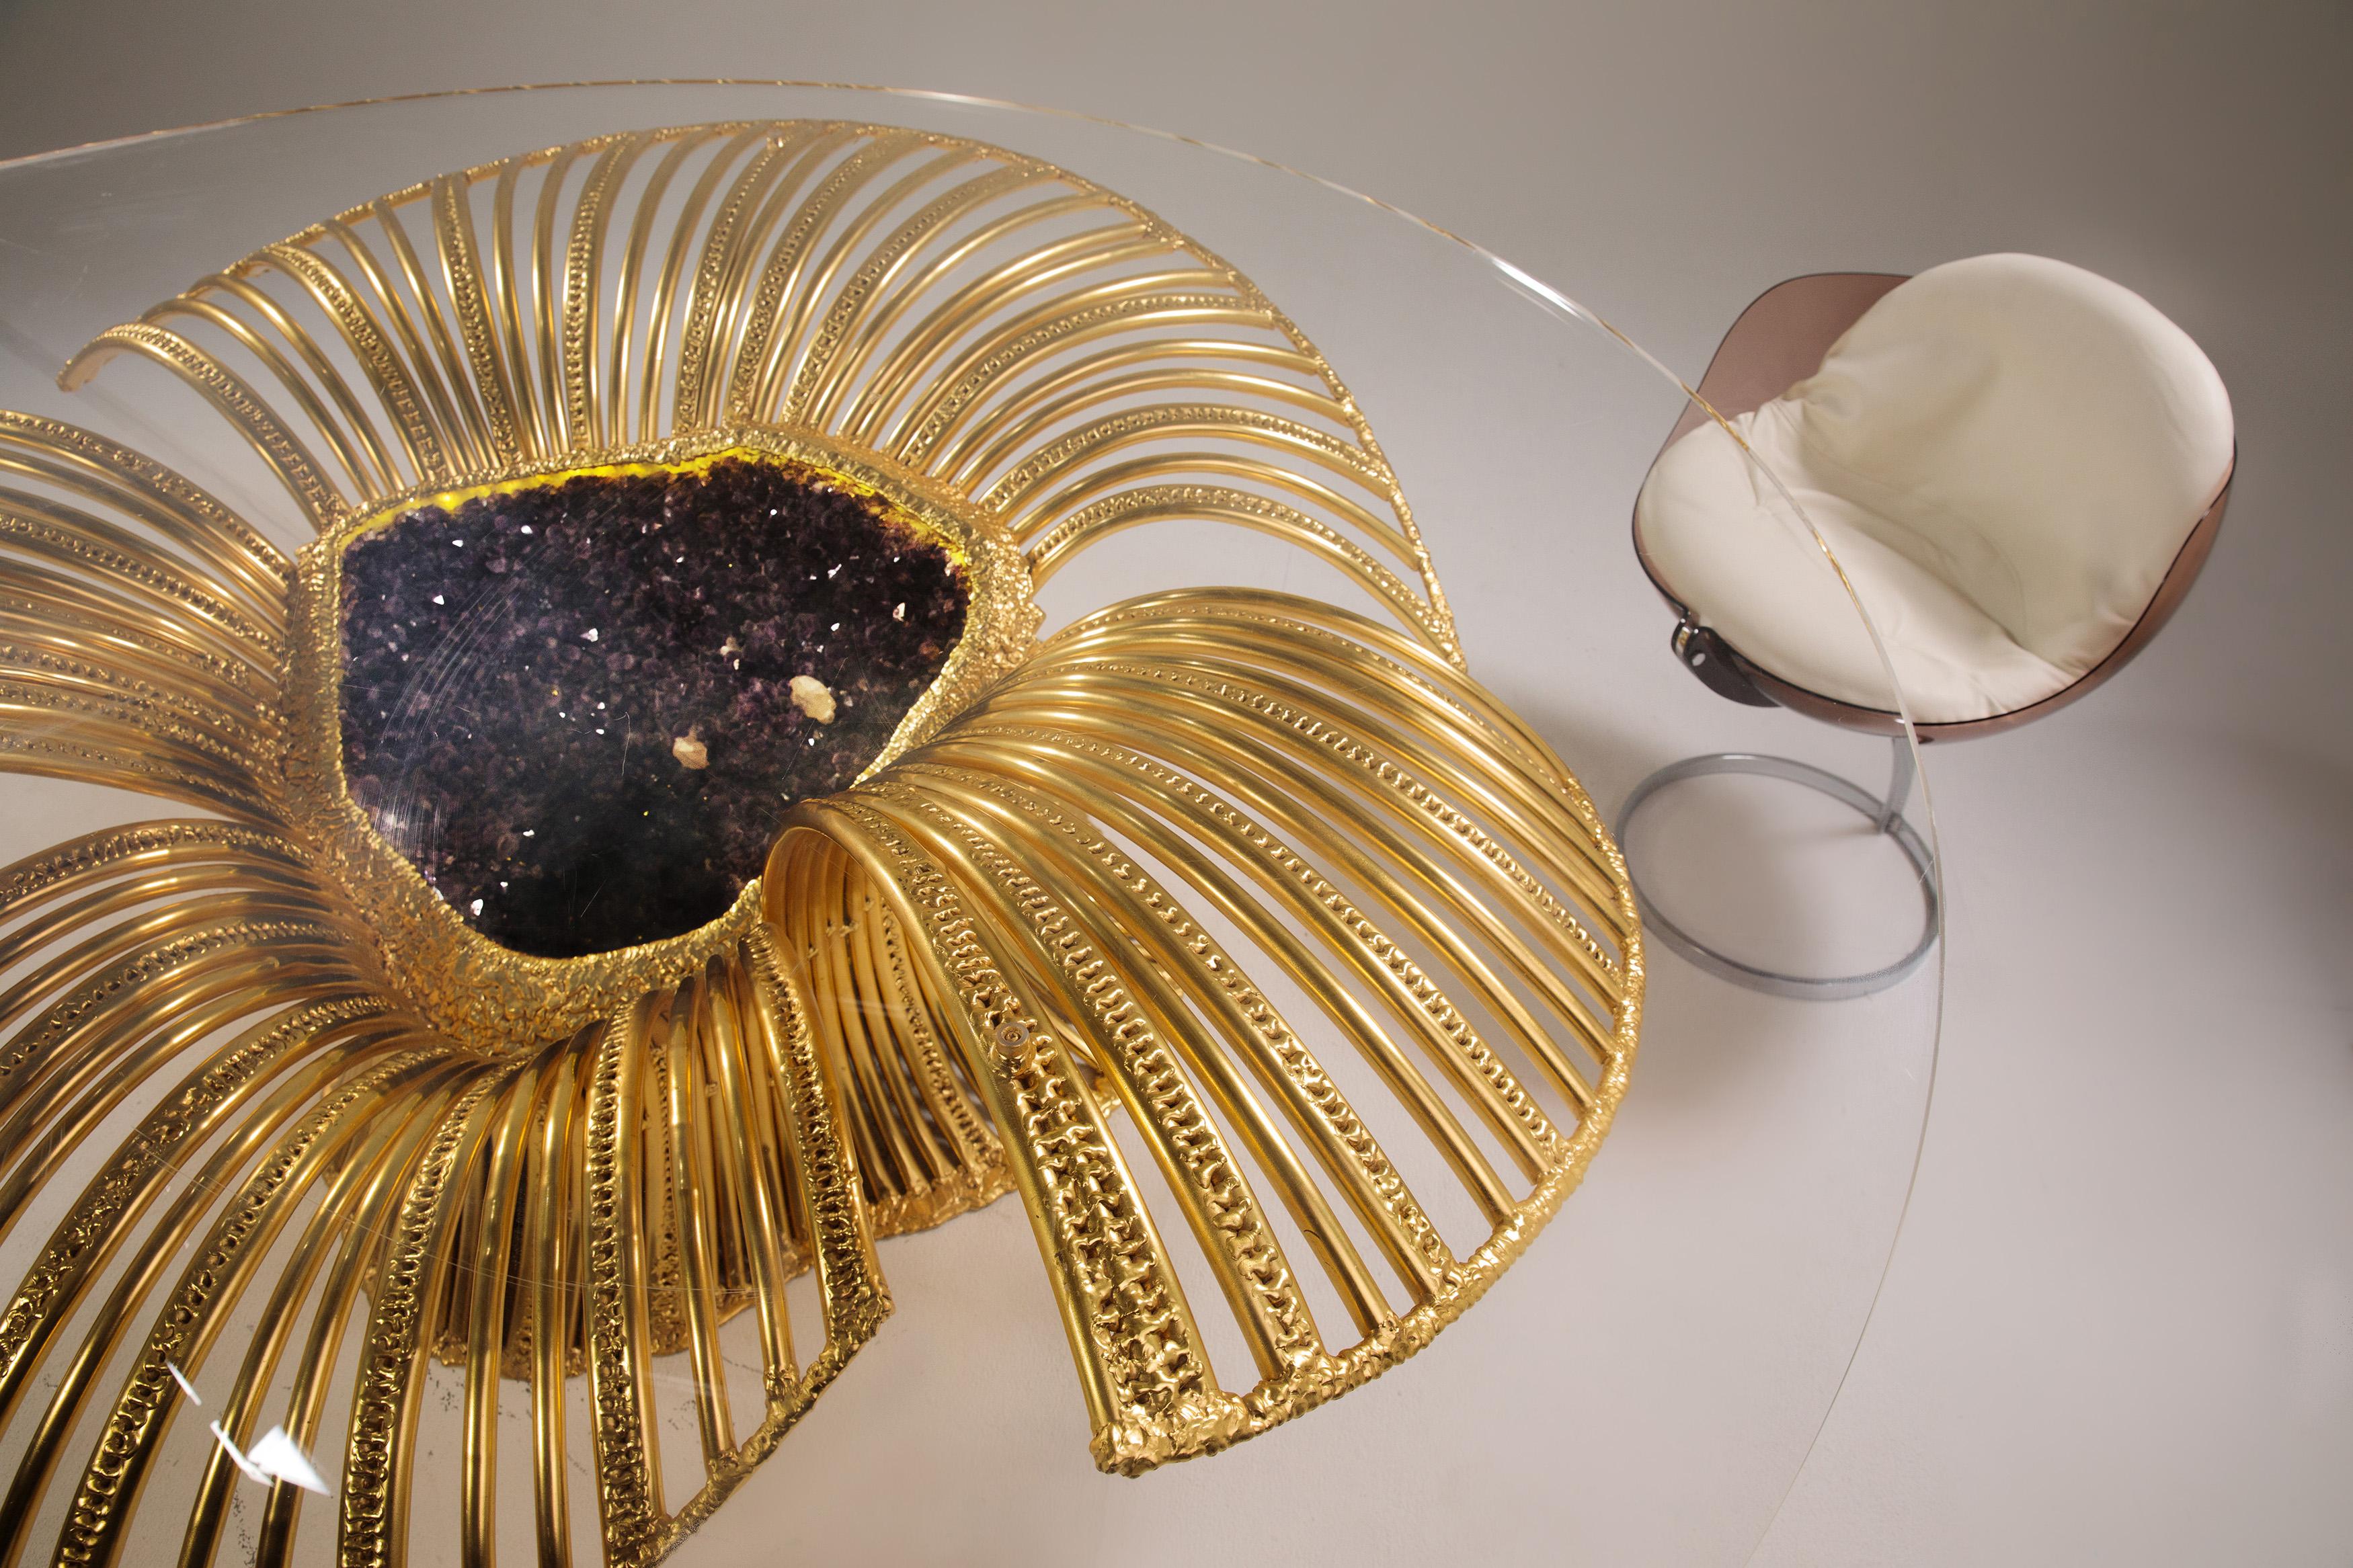 Brass Sea Anemone, Sculpture-Table by Richard Faure